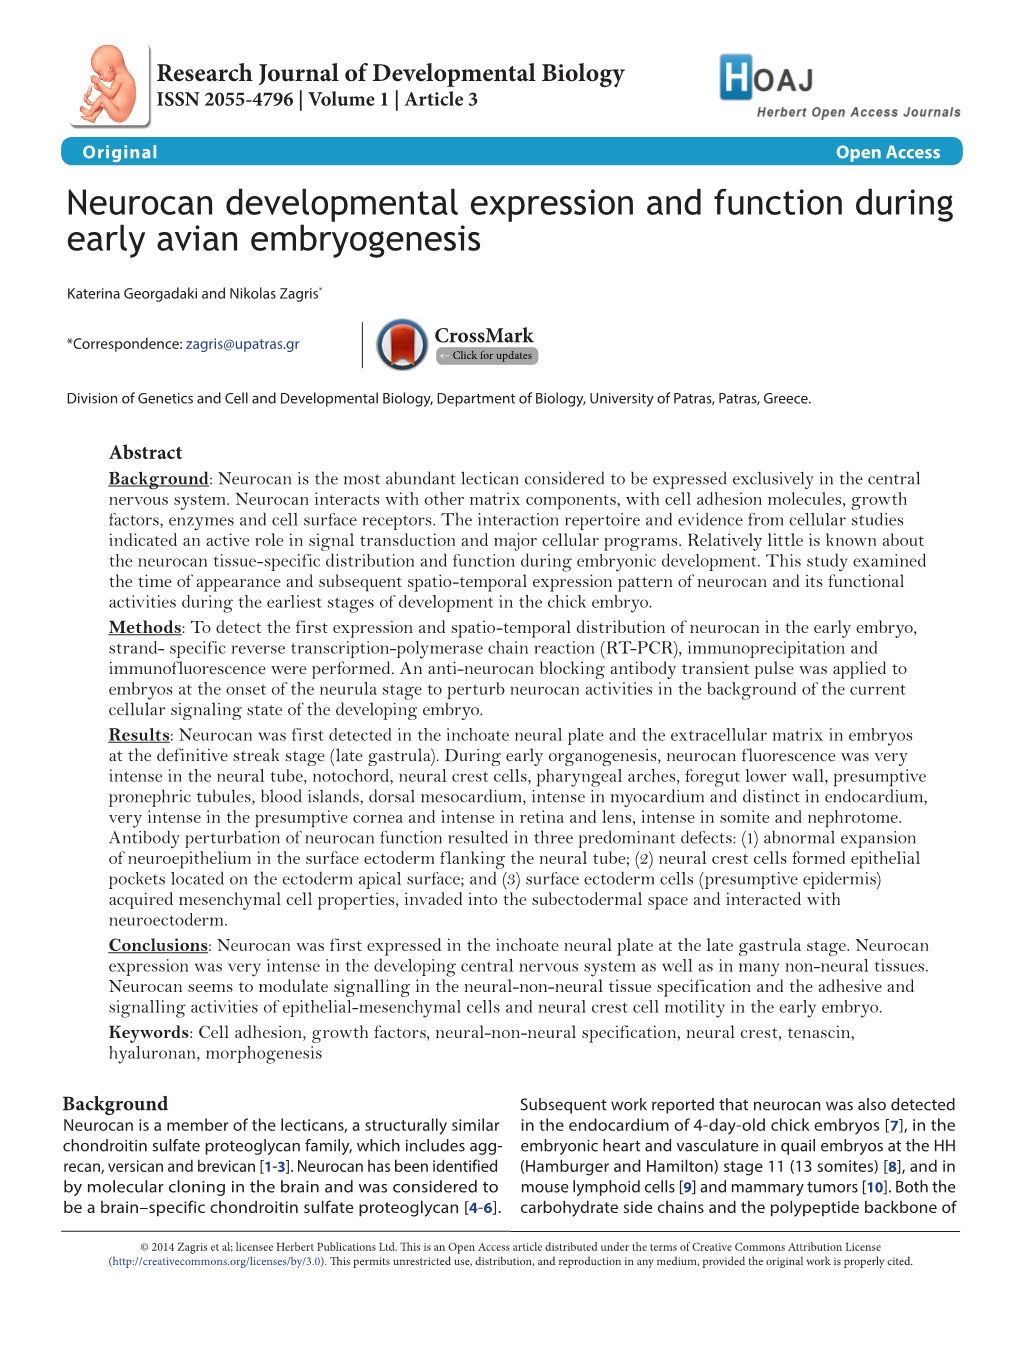 Neurocan Developmental Expression and Function During Early Avian Embryogenesis